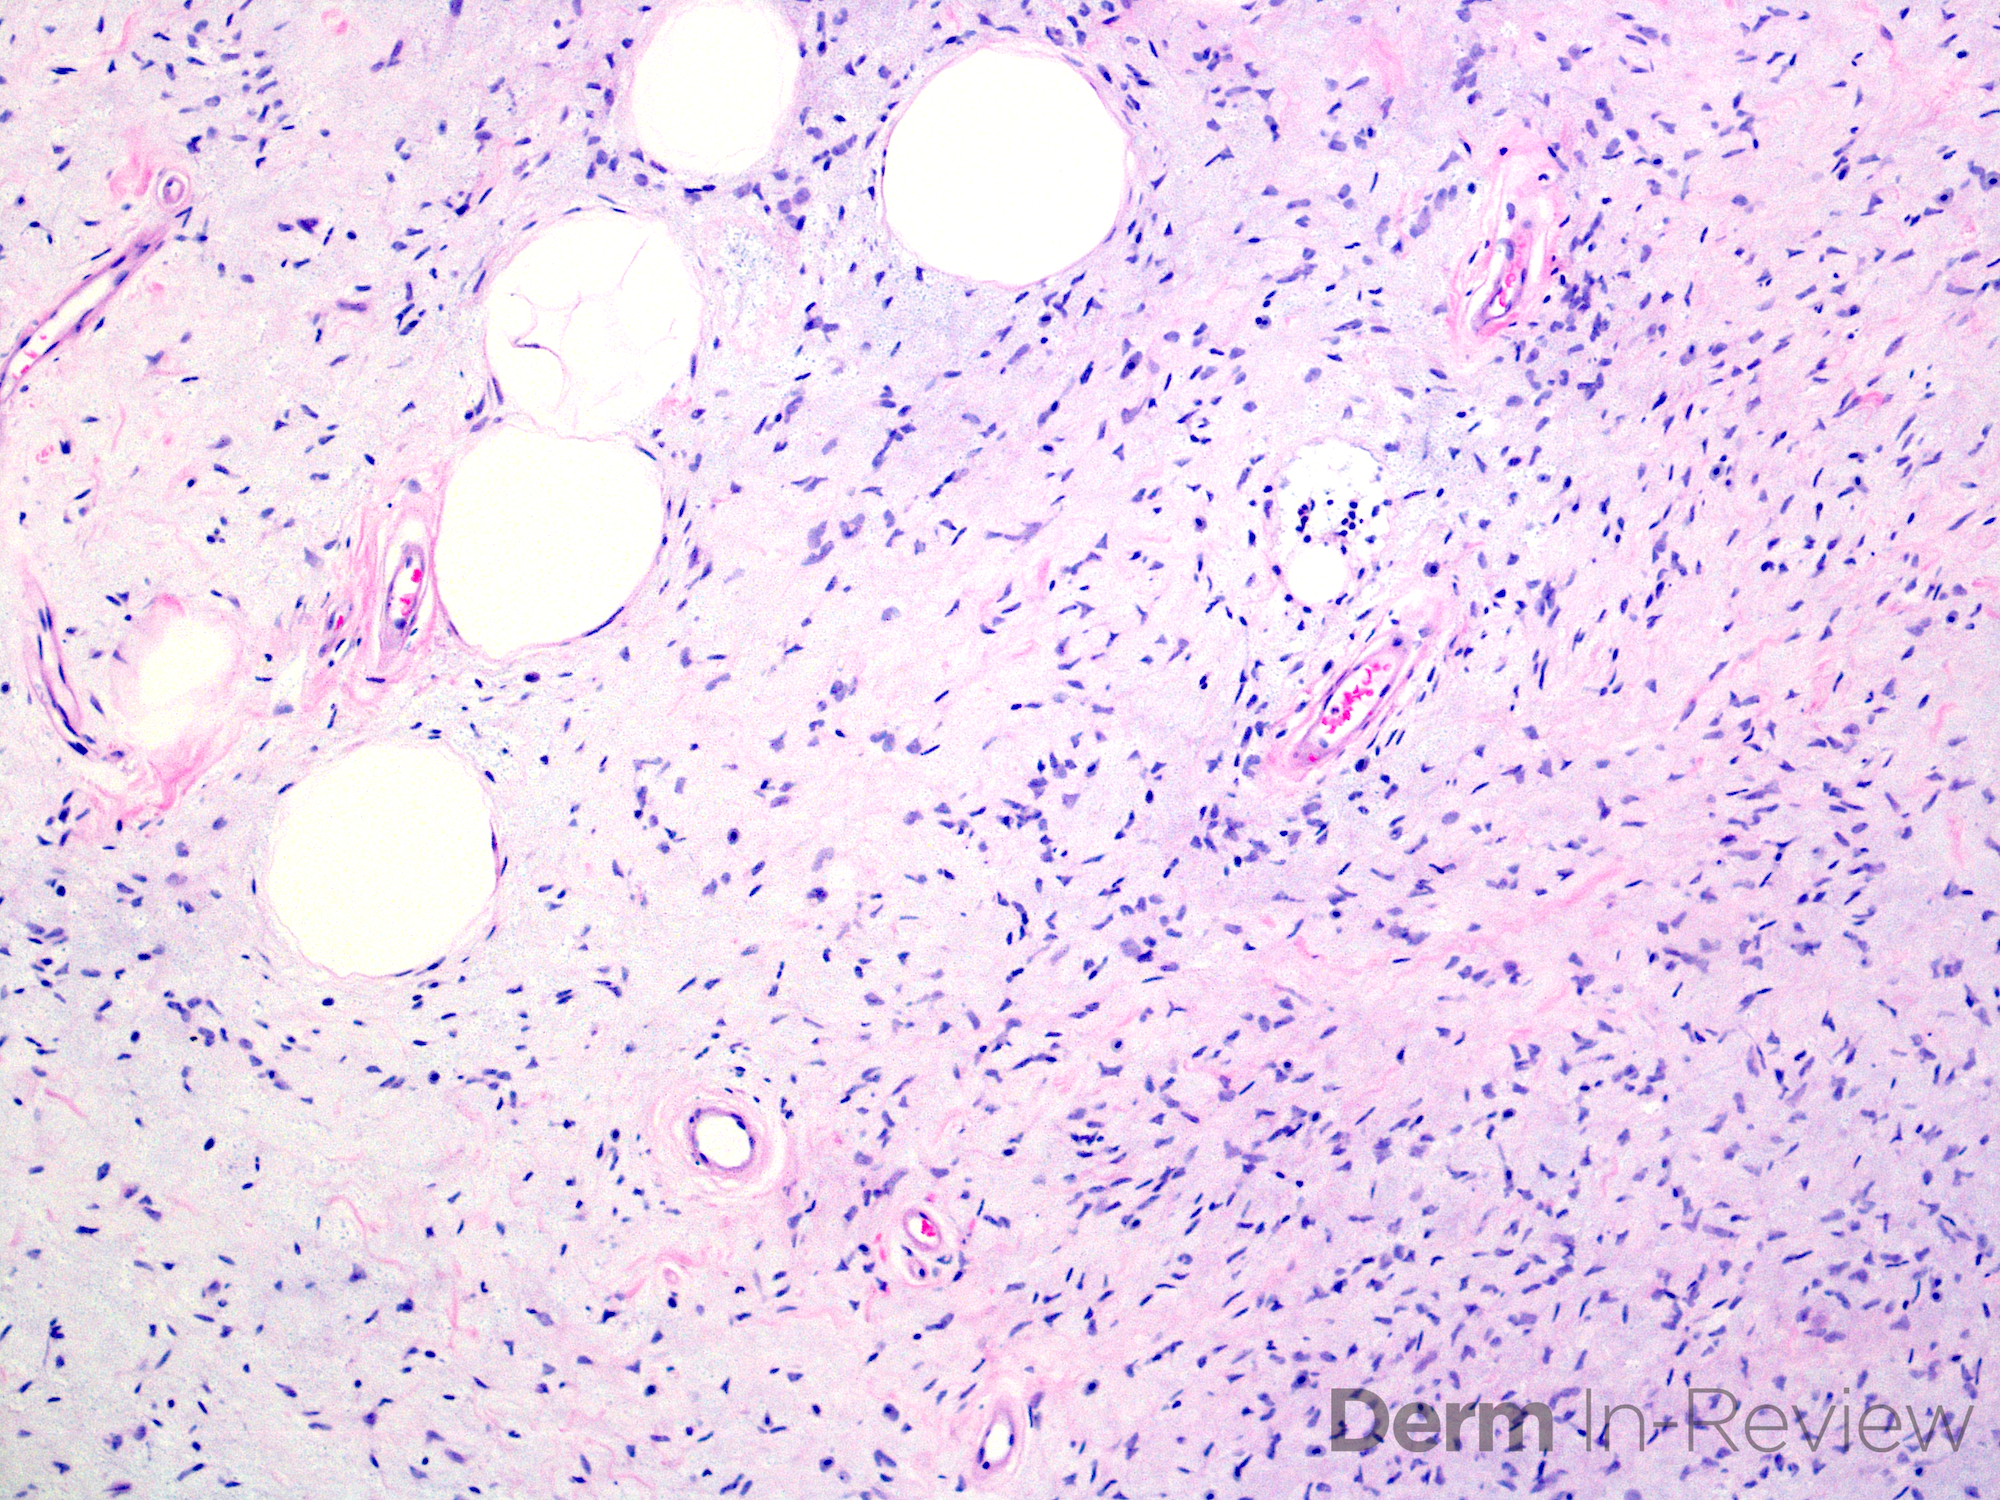 16.3 spindle cell lipoma